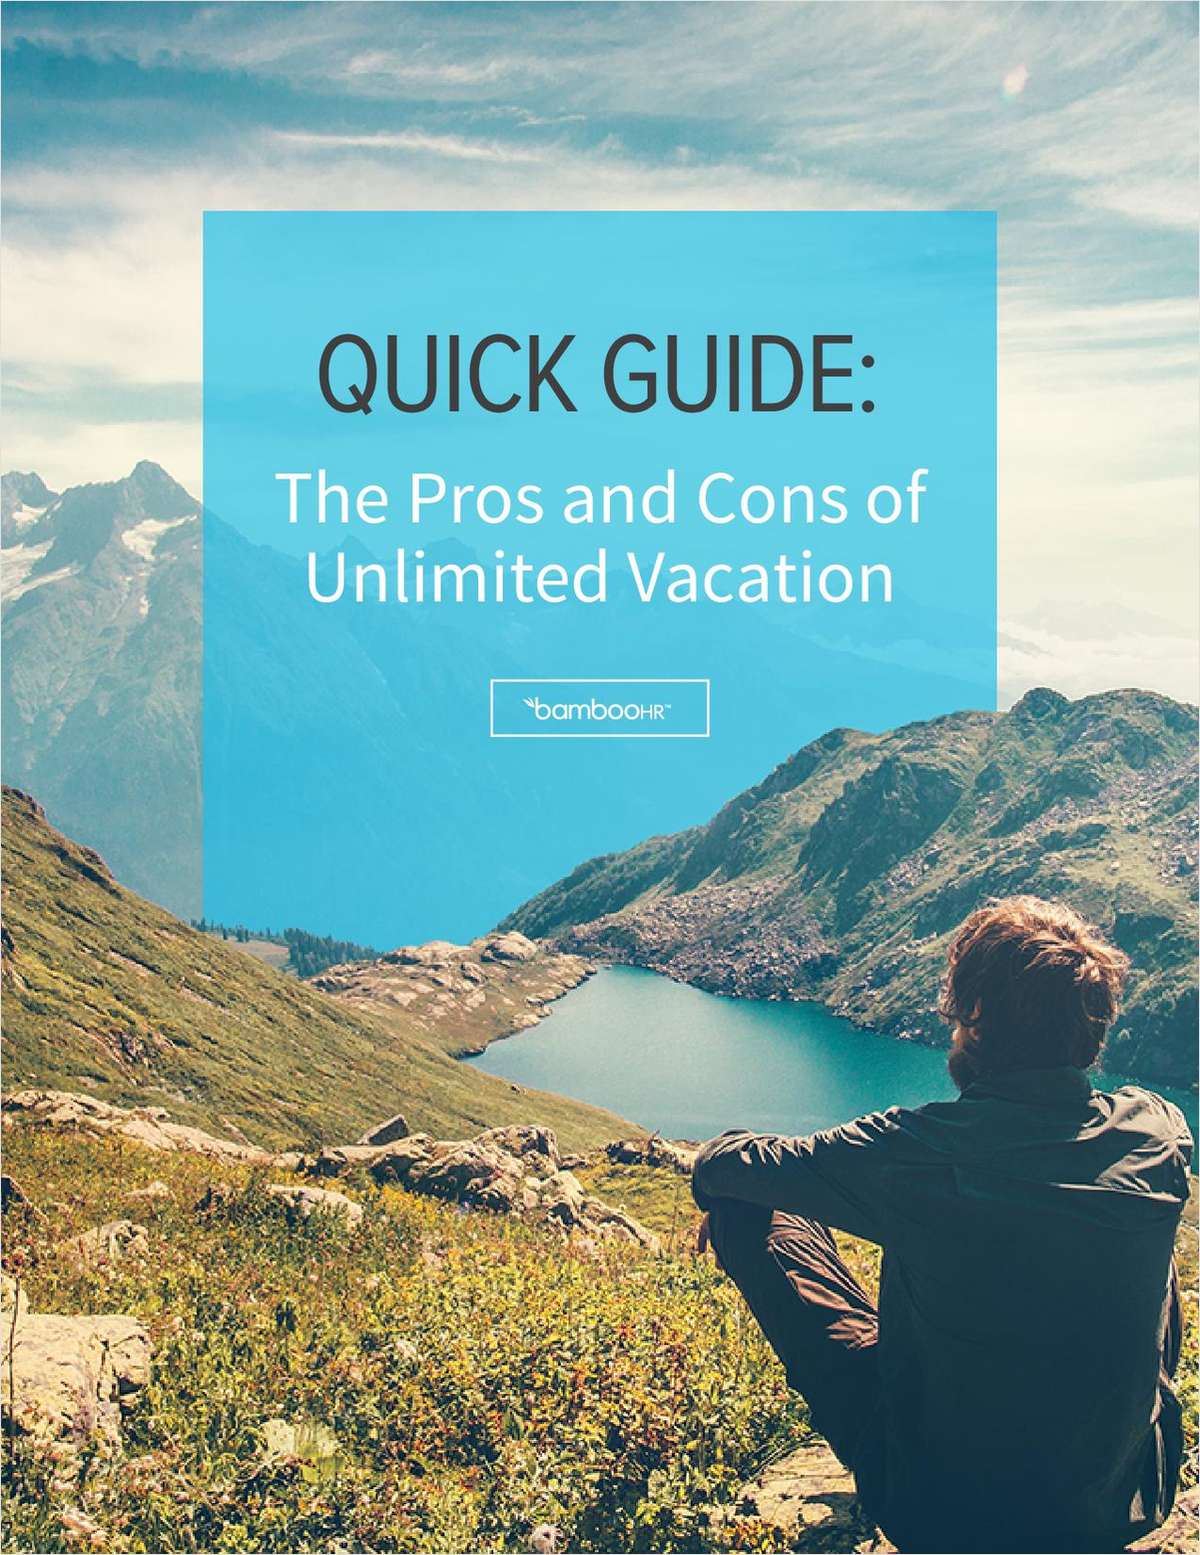 Quick Guide: The Pros and Cons of Unlimited Vacation